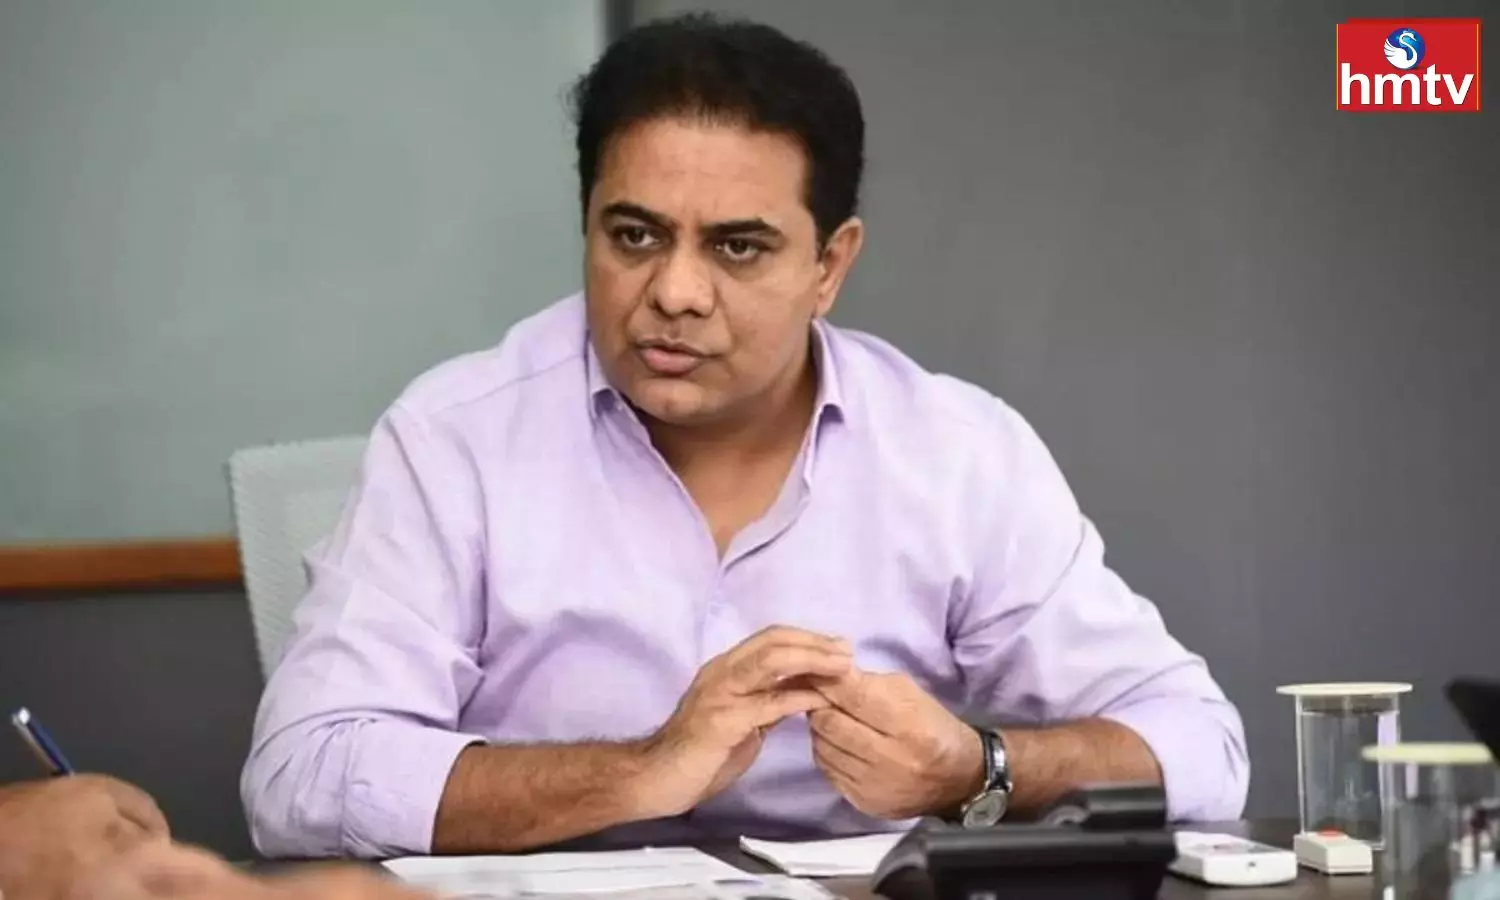 KTR fire on the behavior of many YouTube channels